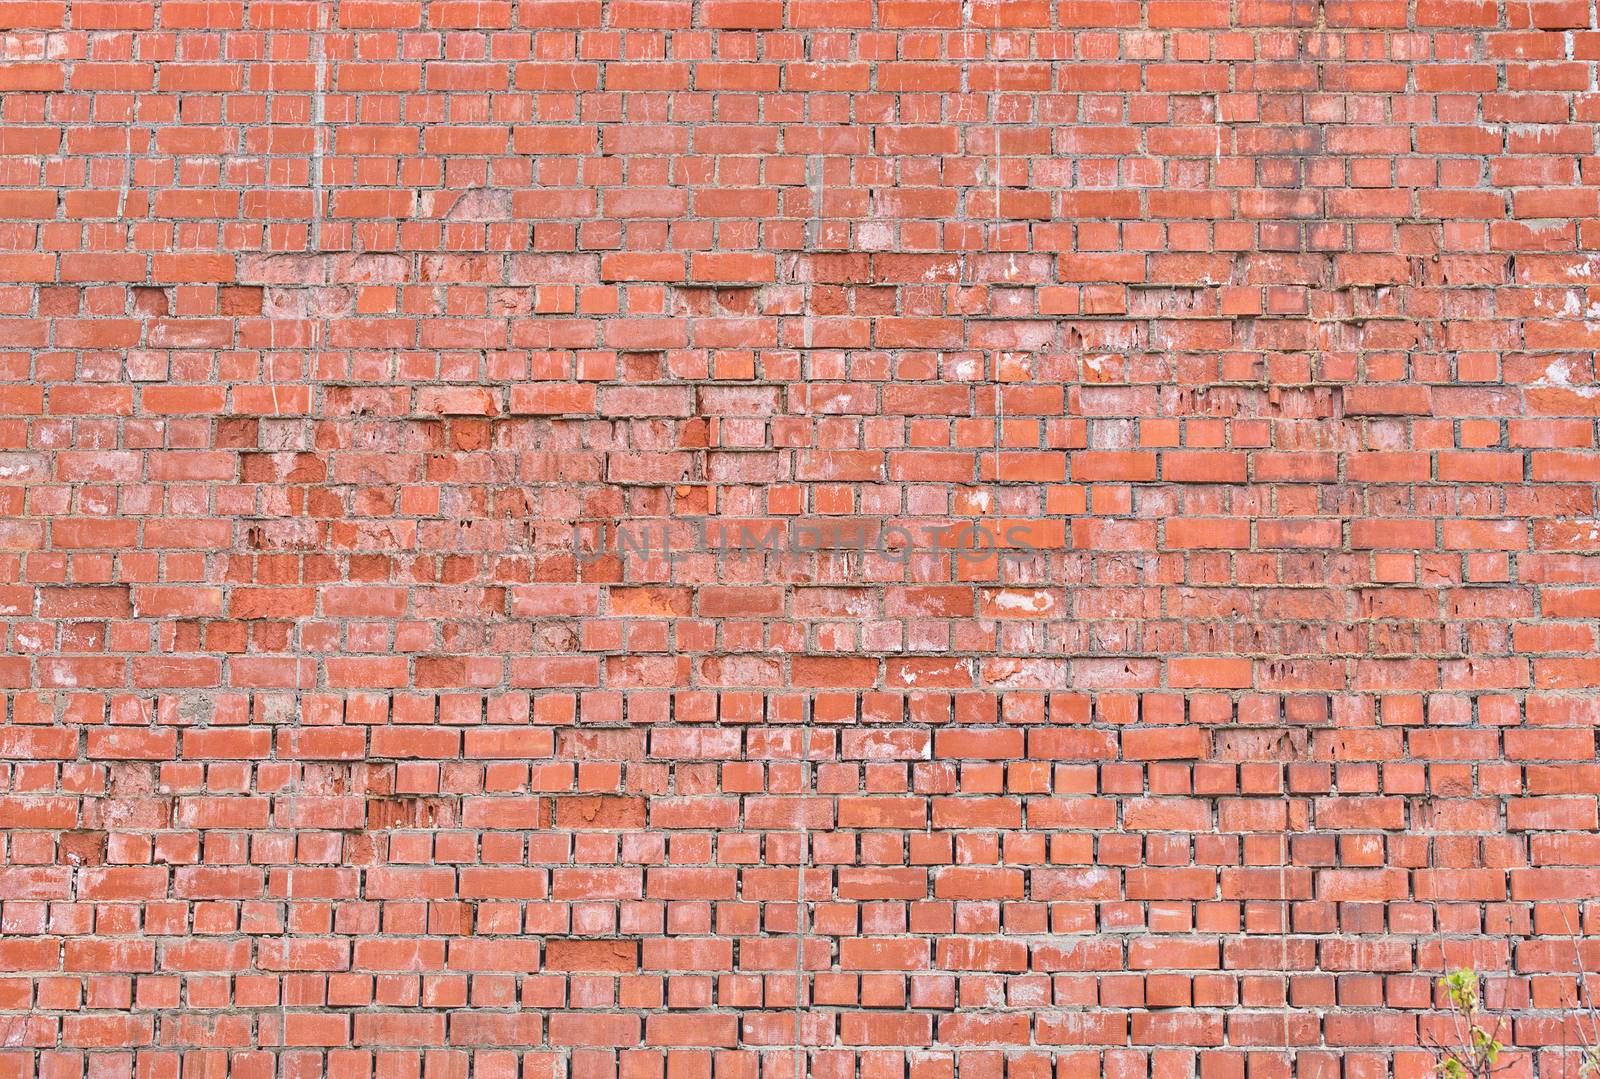 Old large red brick wall background. Rustic old brick wall texture